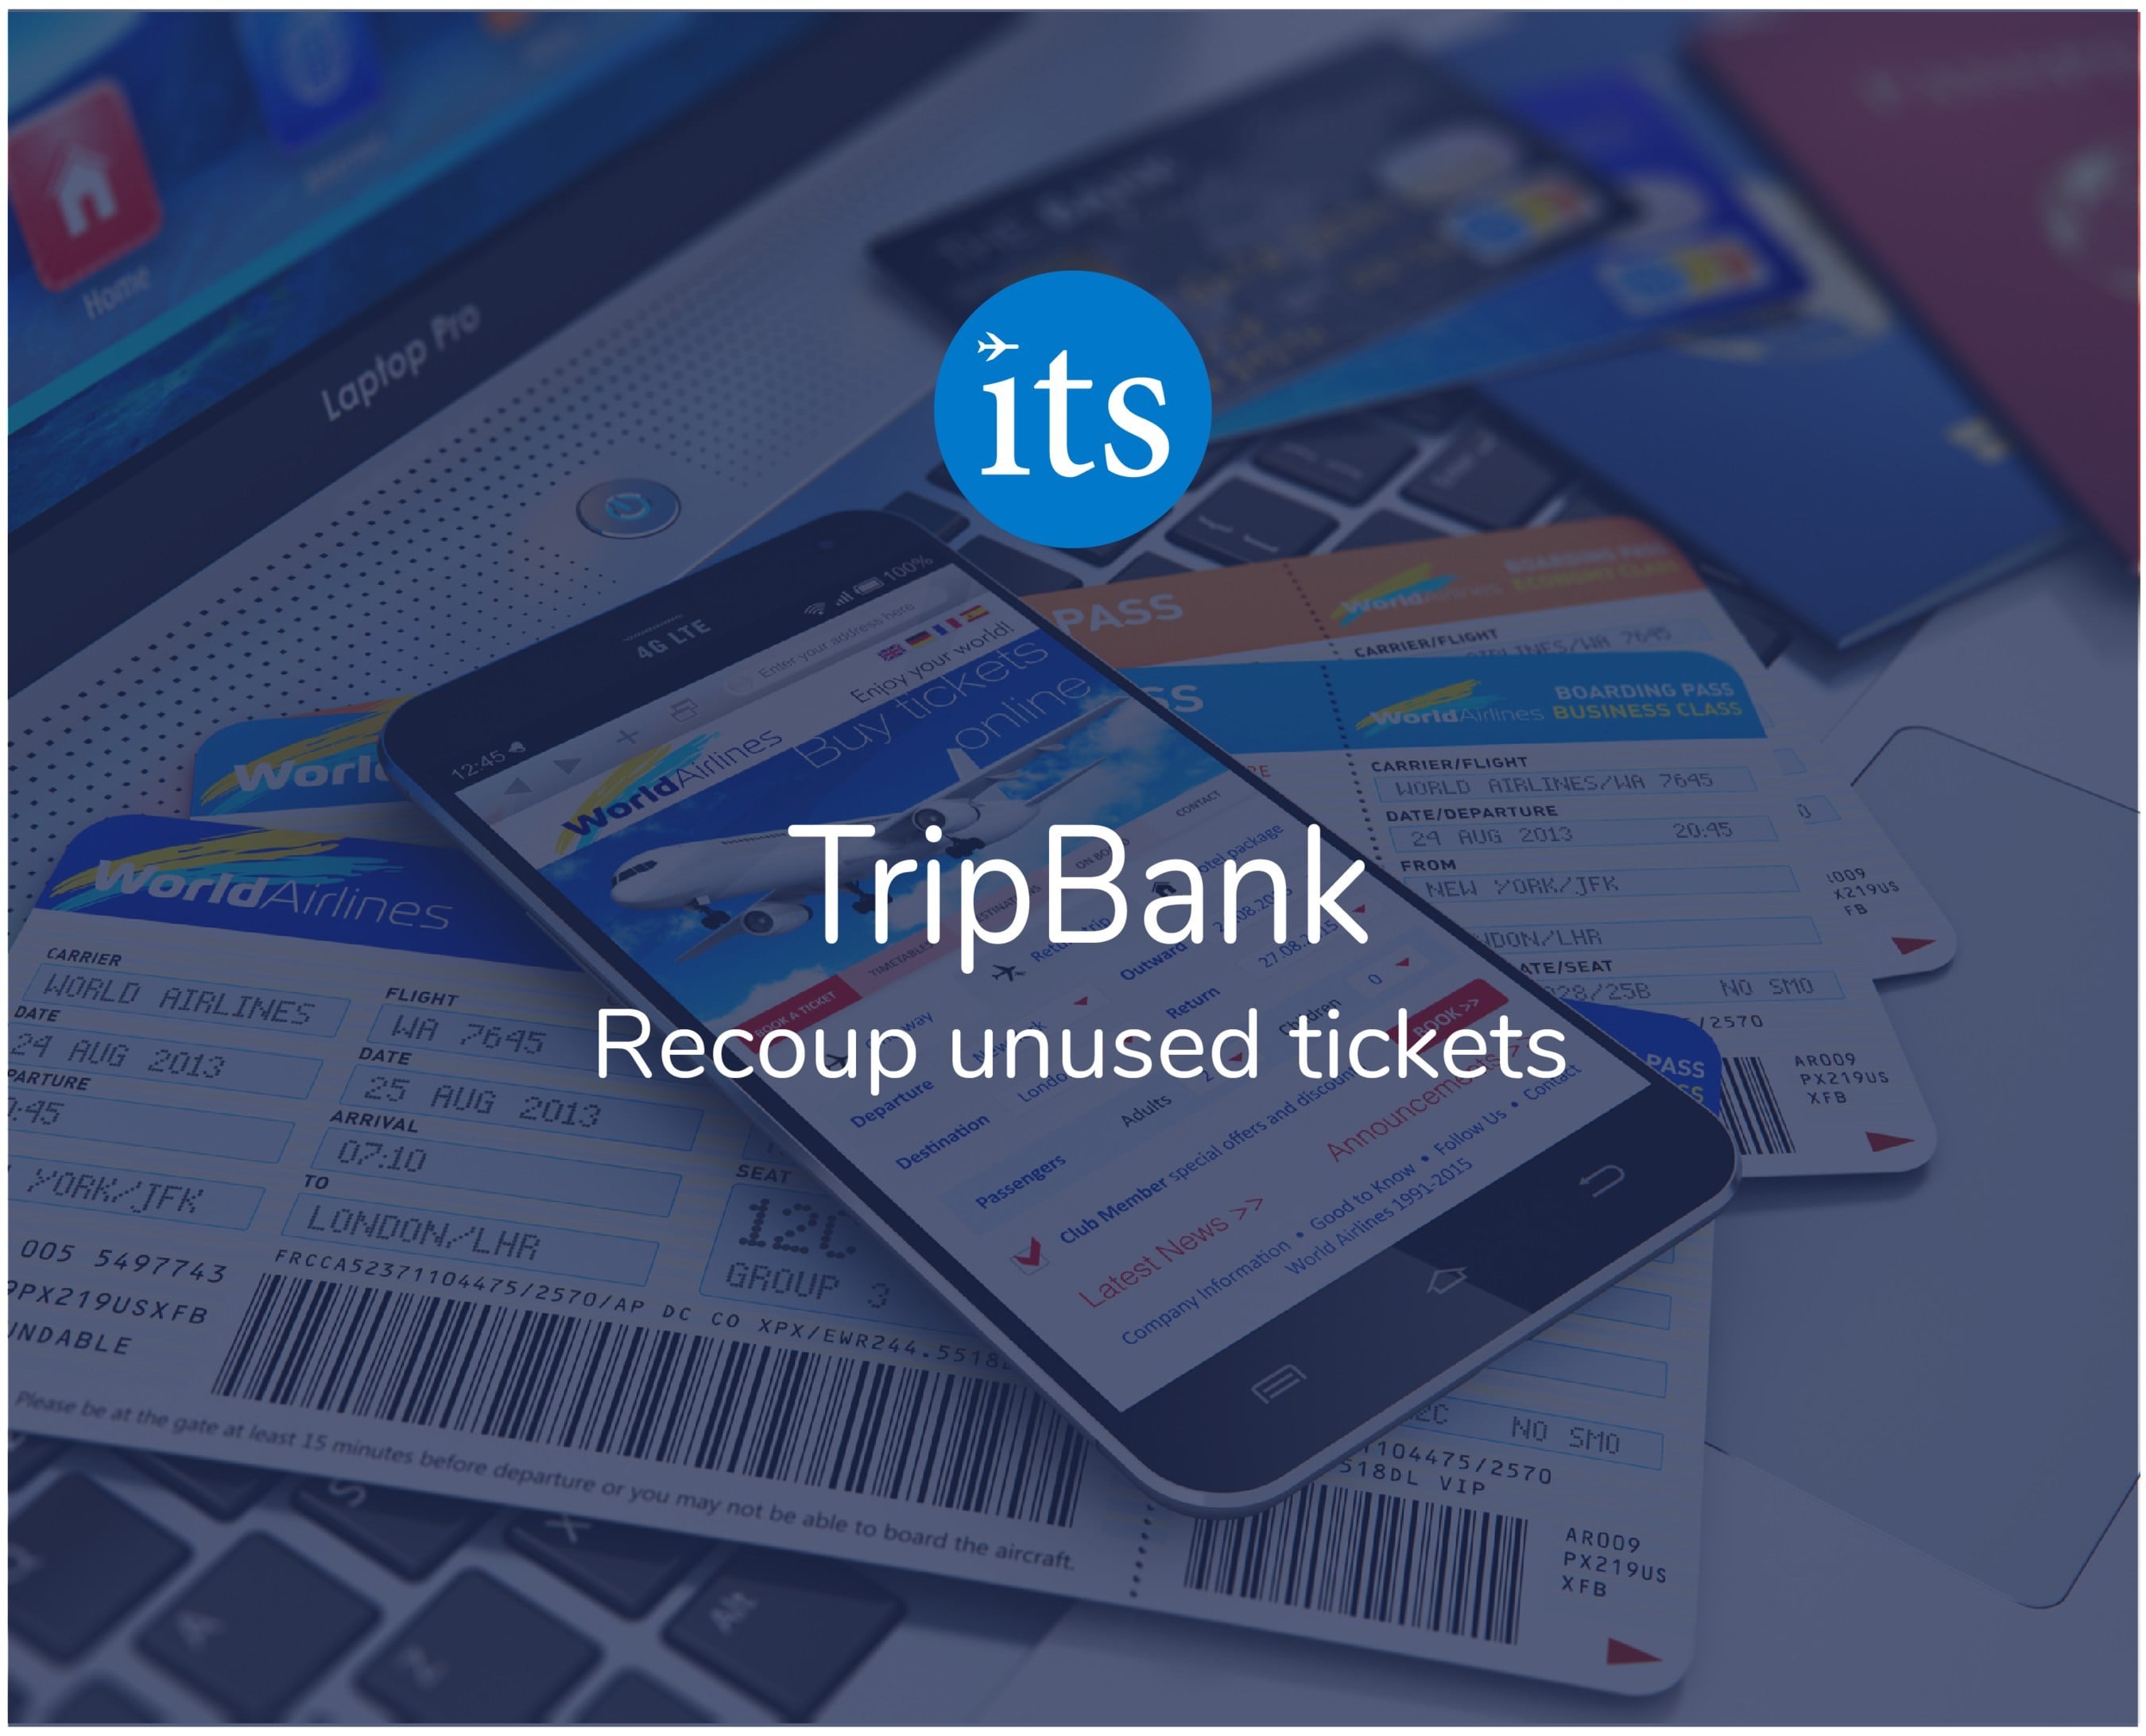 Internet Travel Solutions Releases TripBank Product Update